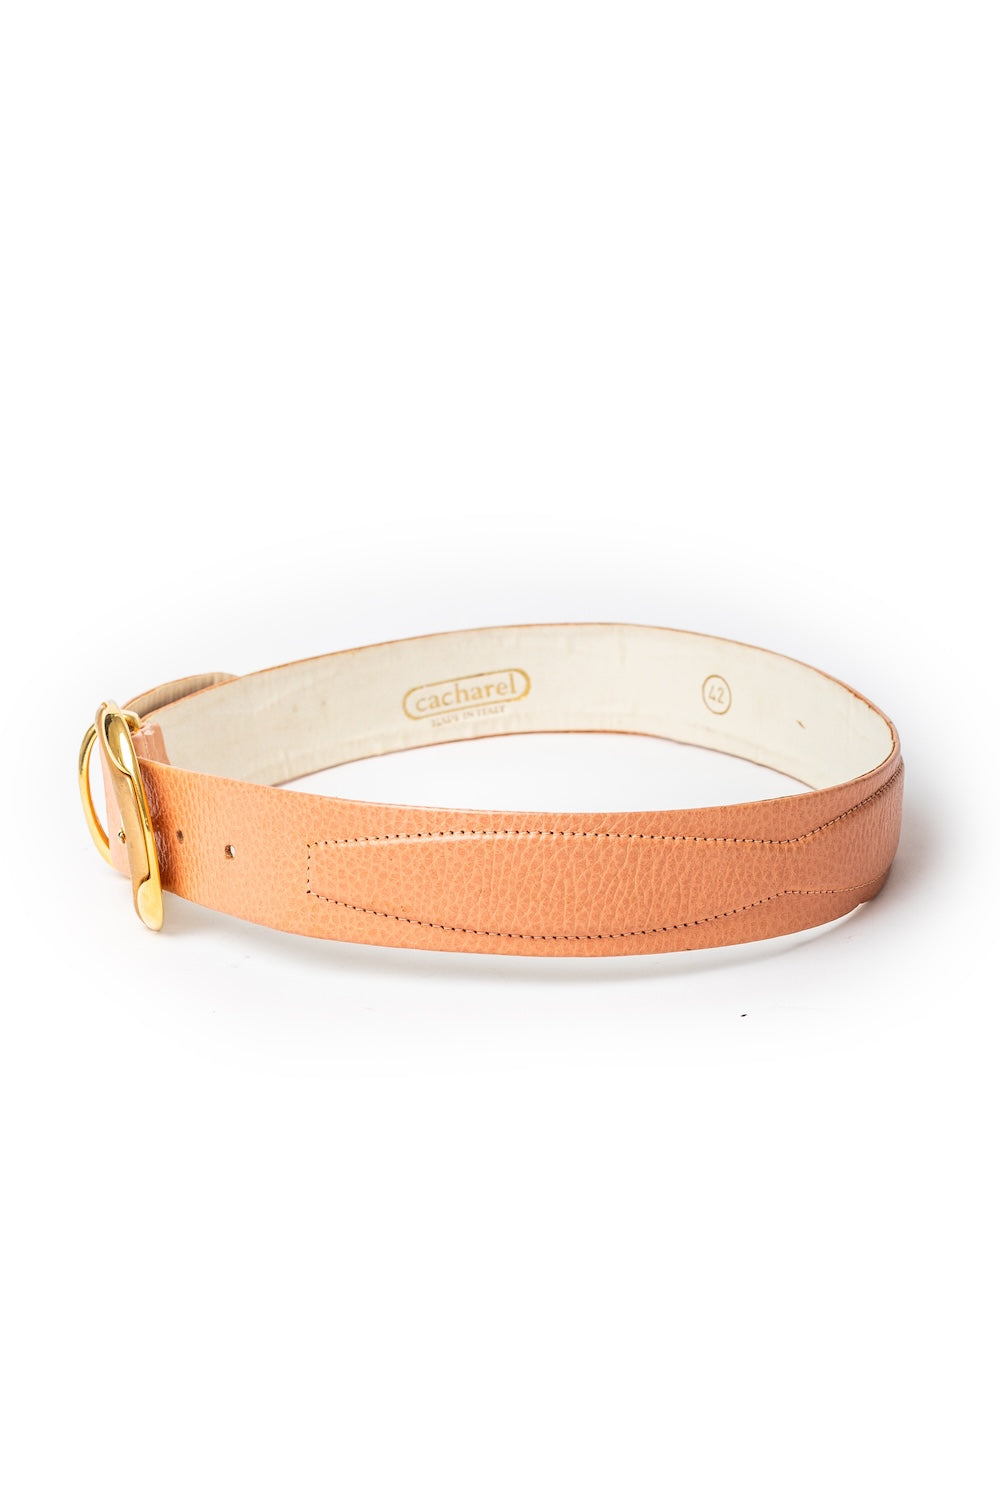 Cacharel <br> 80's peach leather belt with gold buckle